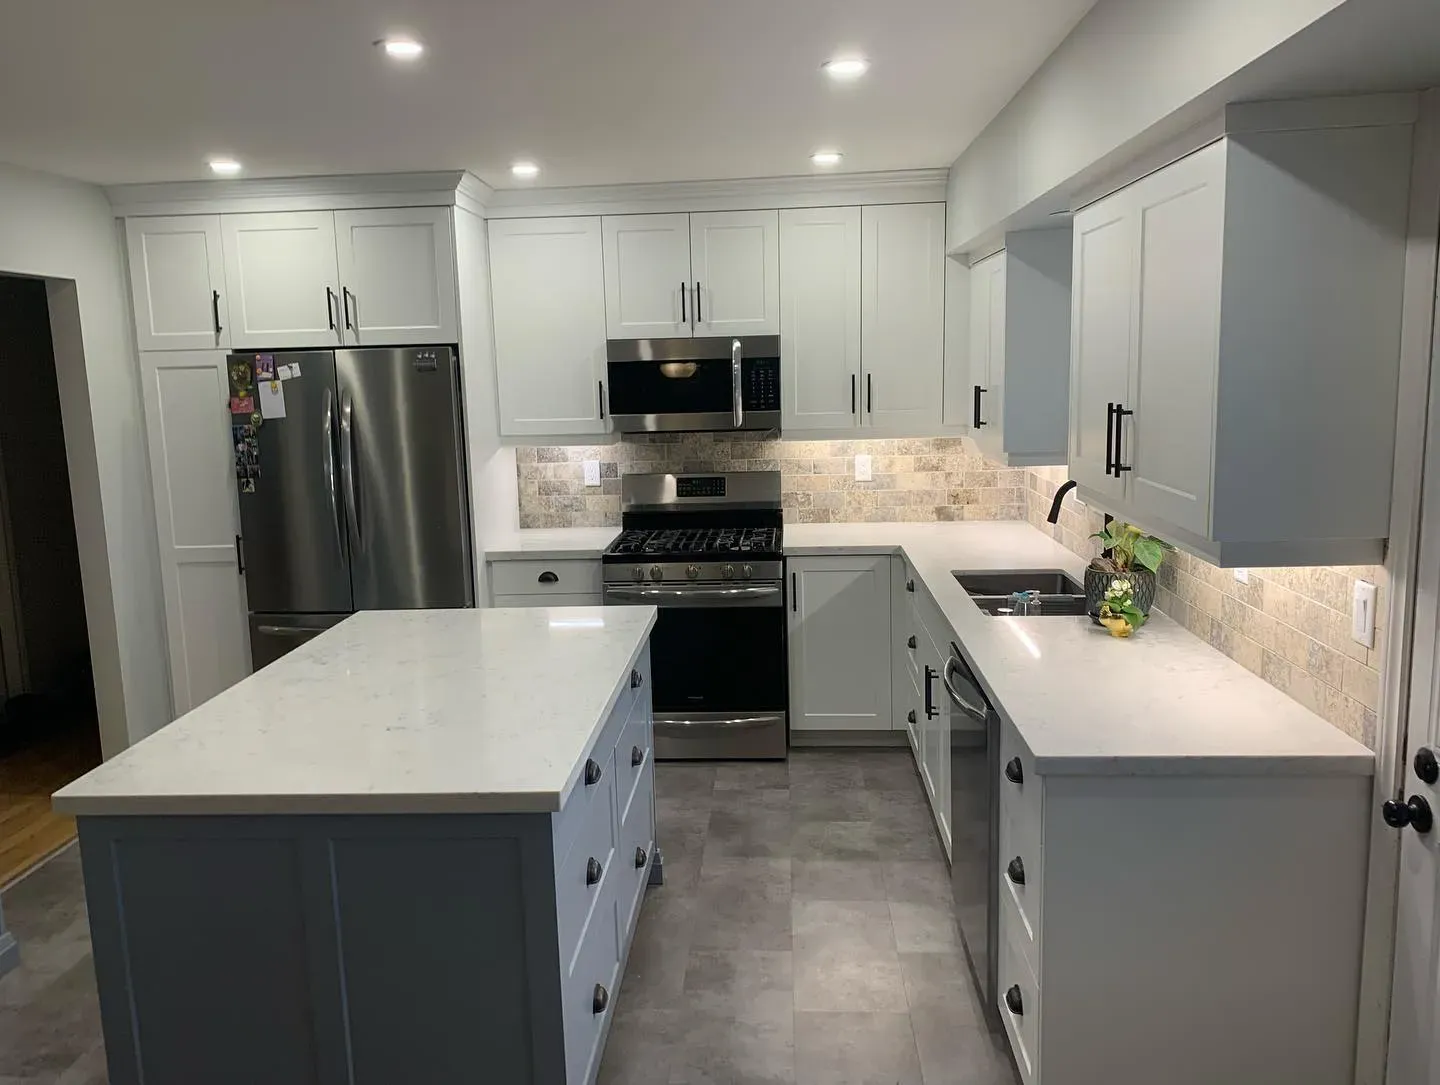 Oxford White kitchen cabinets color review